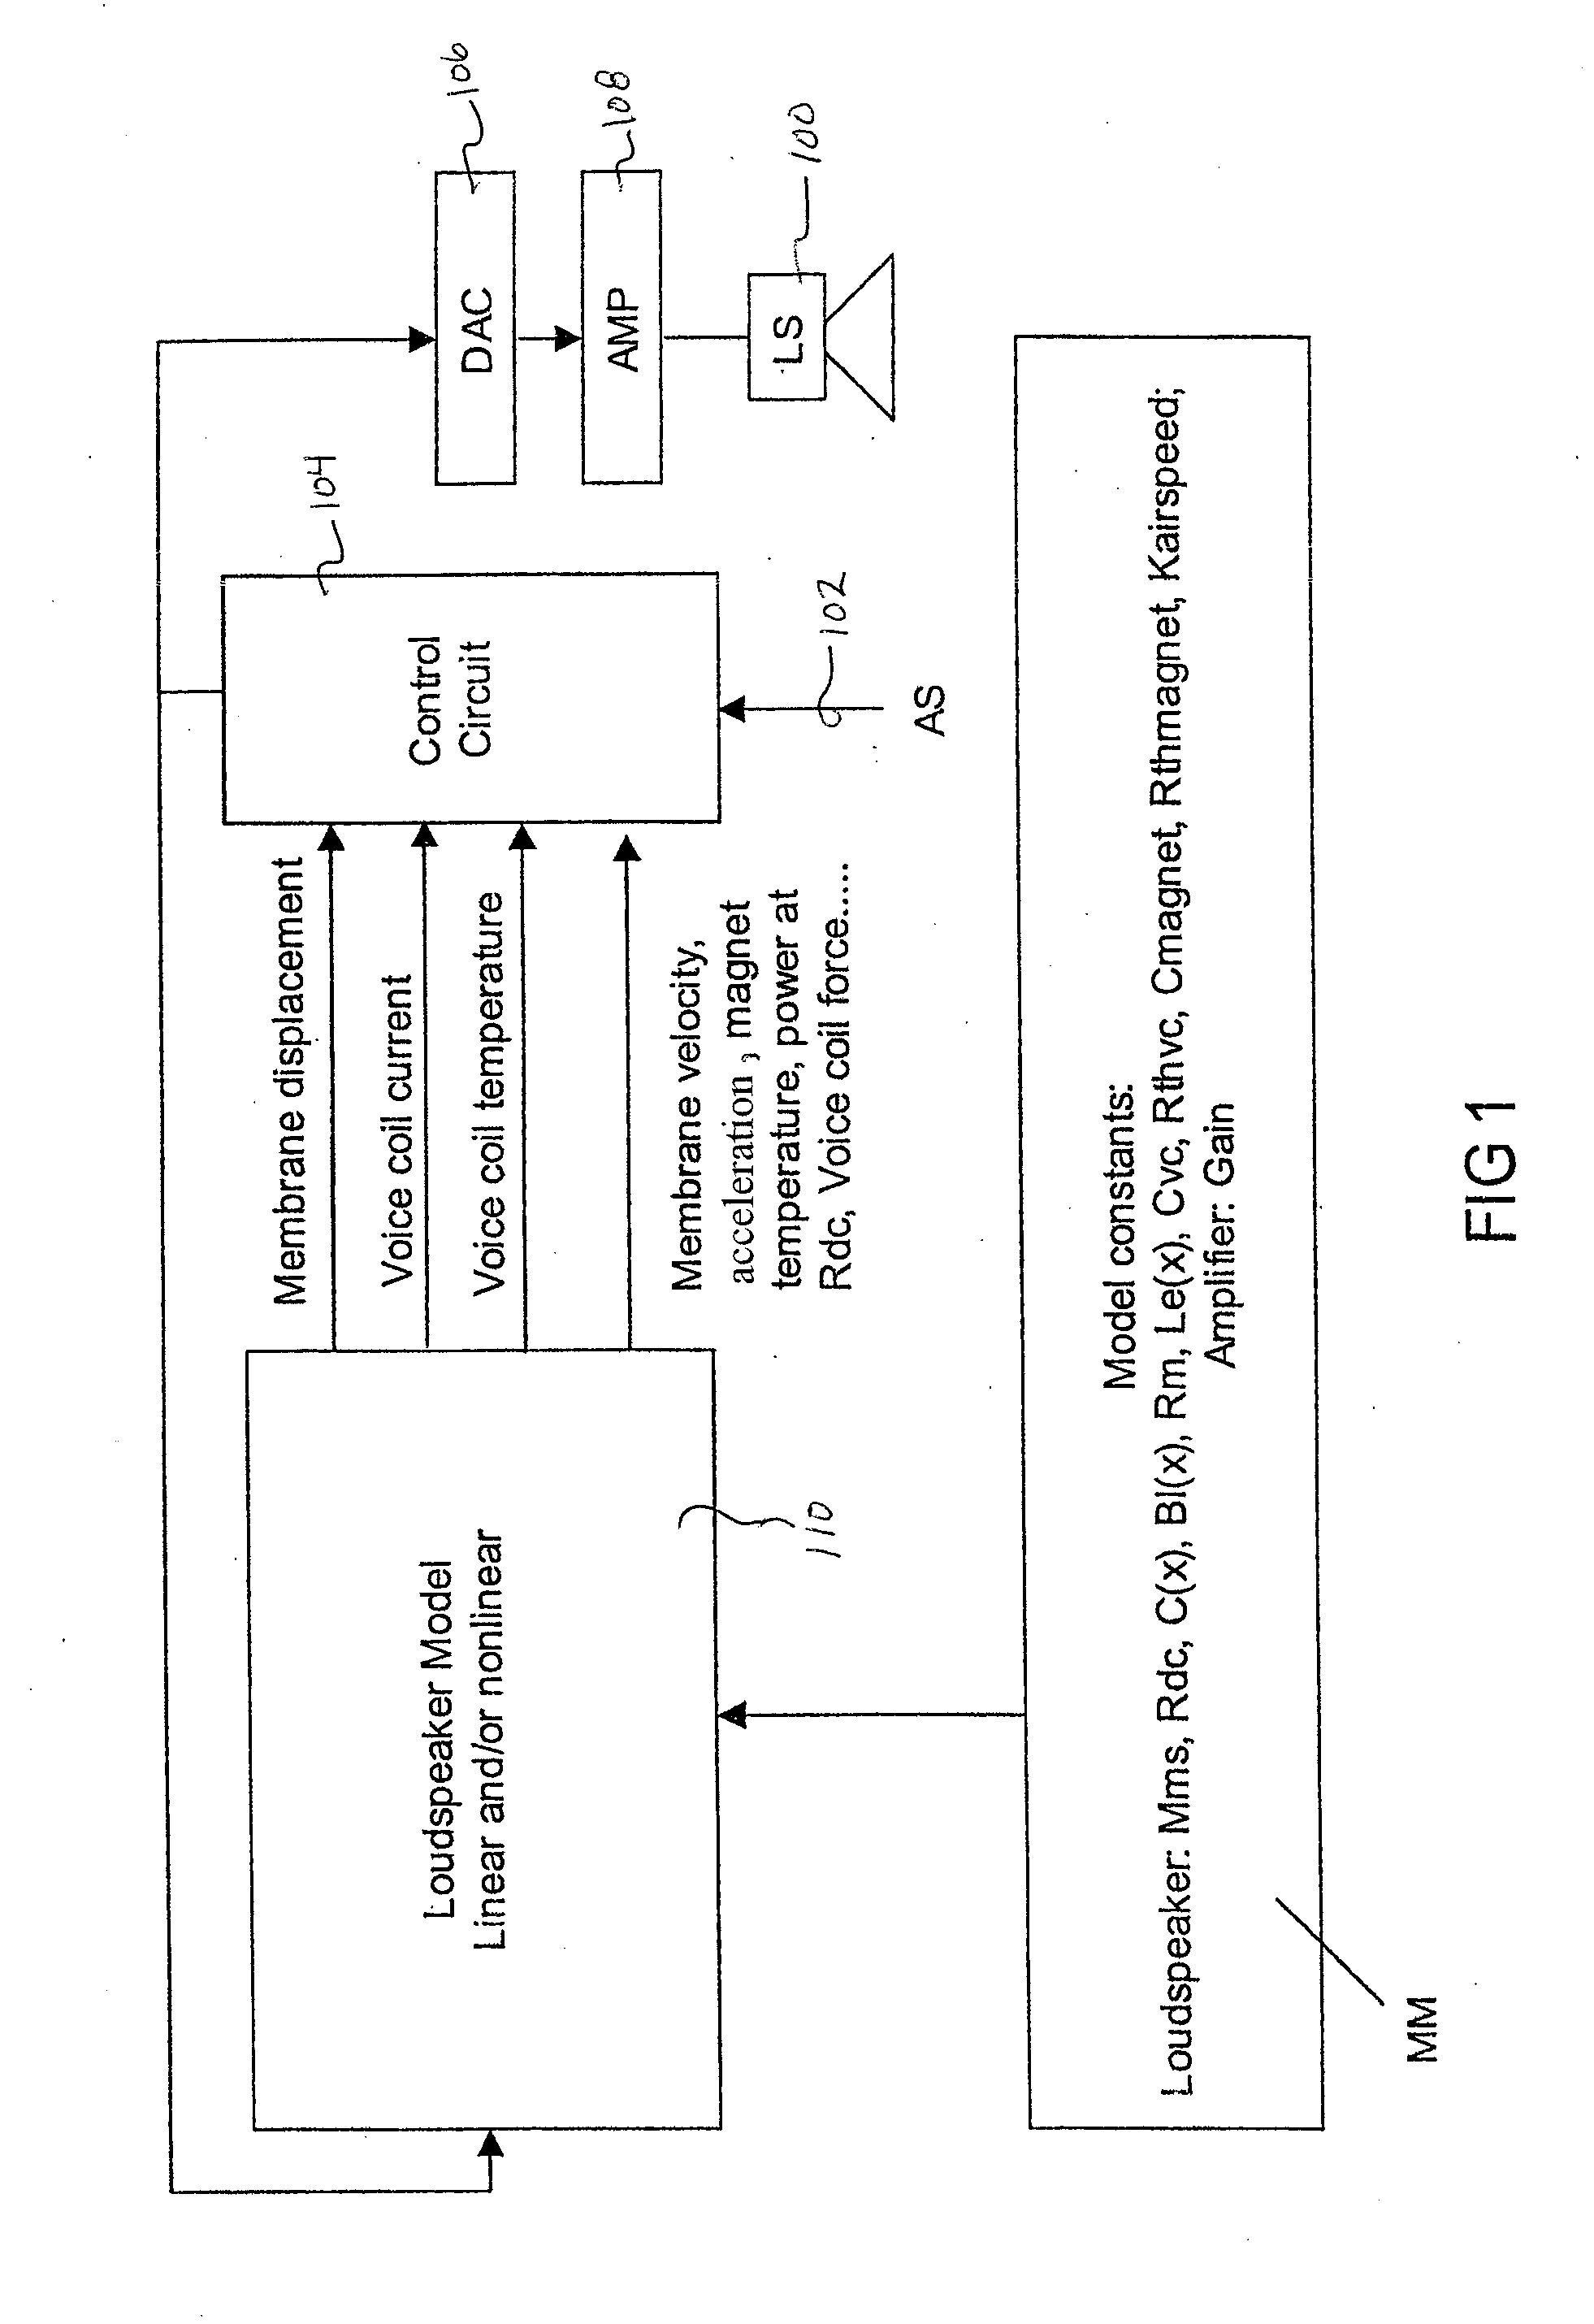 System for predicting the behavior of a transducer